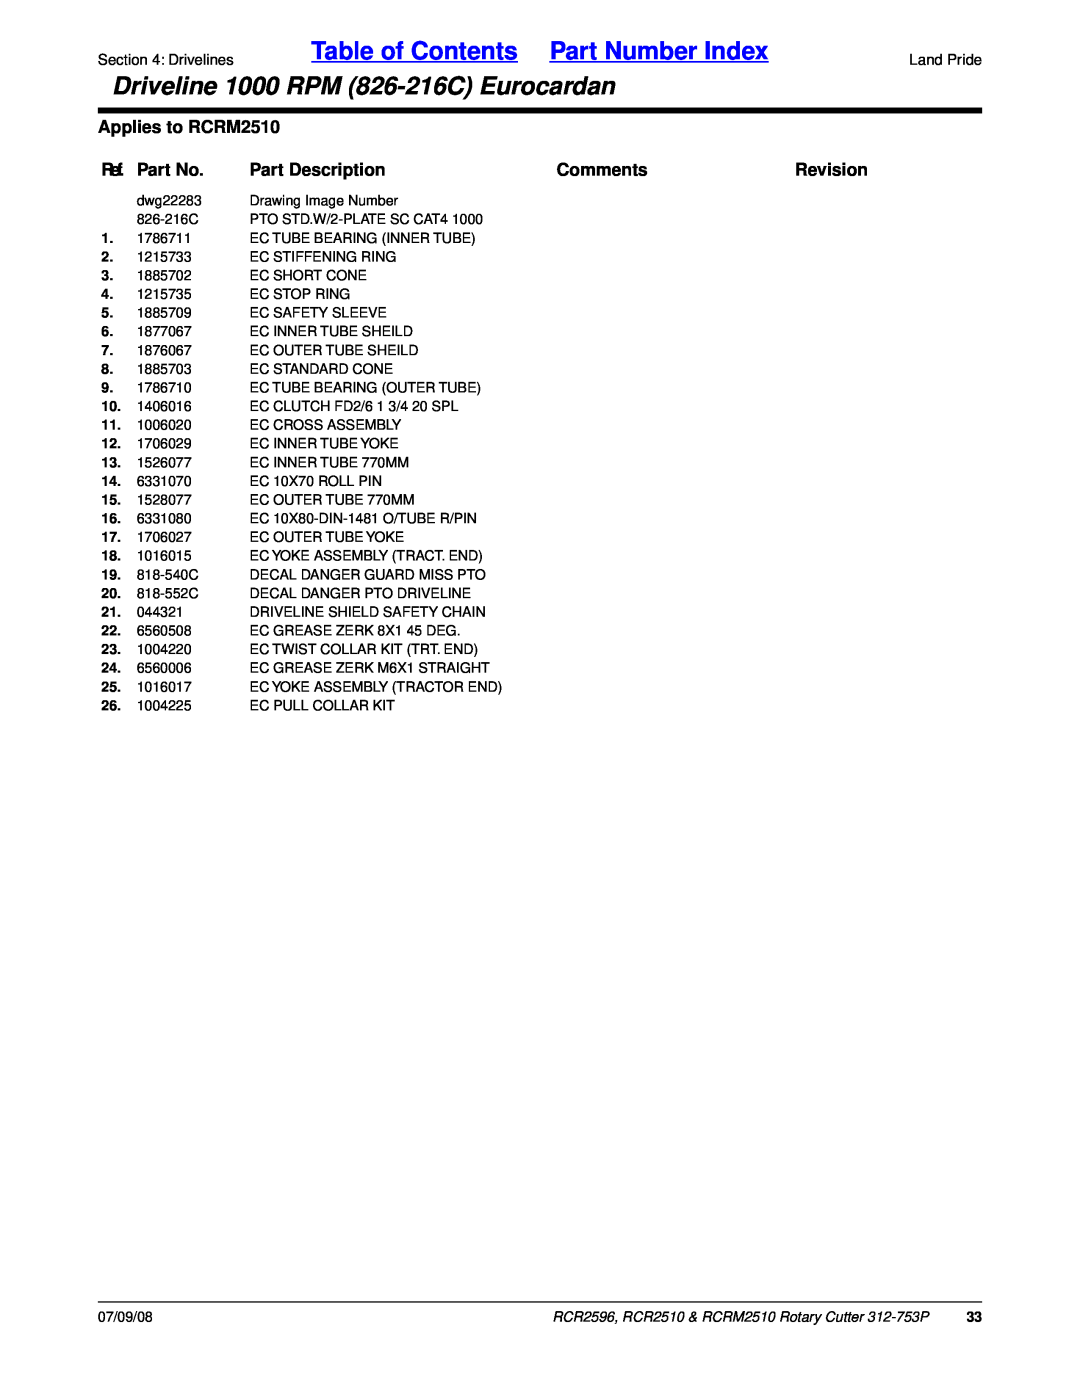 Land Pride RCR2596 manual Table of Contents Part Number Index, Driveline 1000 RPM 826-216CEurocardan, Applies to RCRM2510 